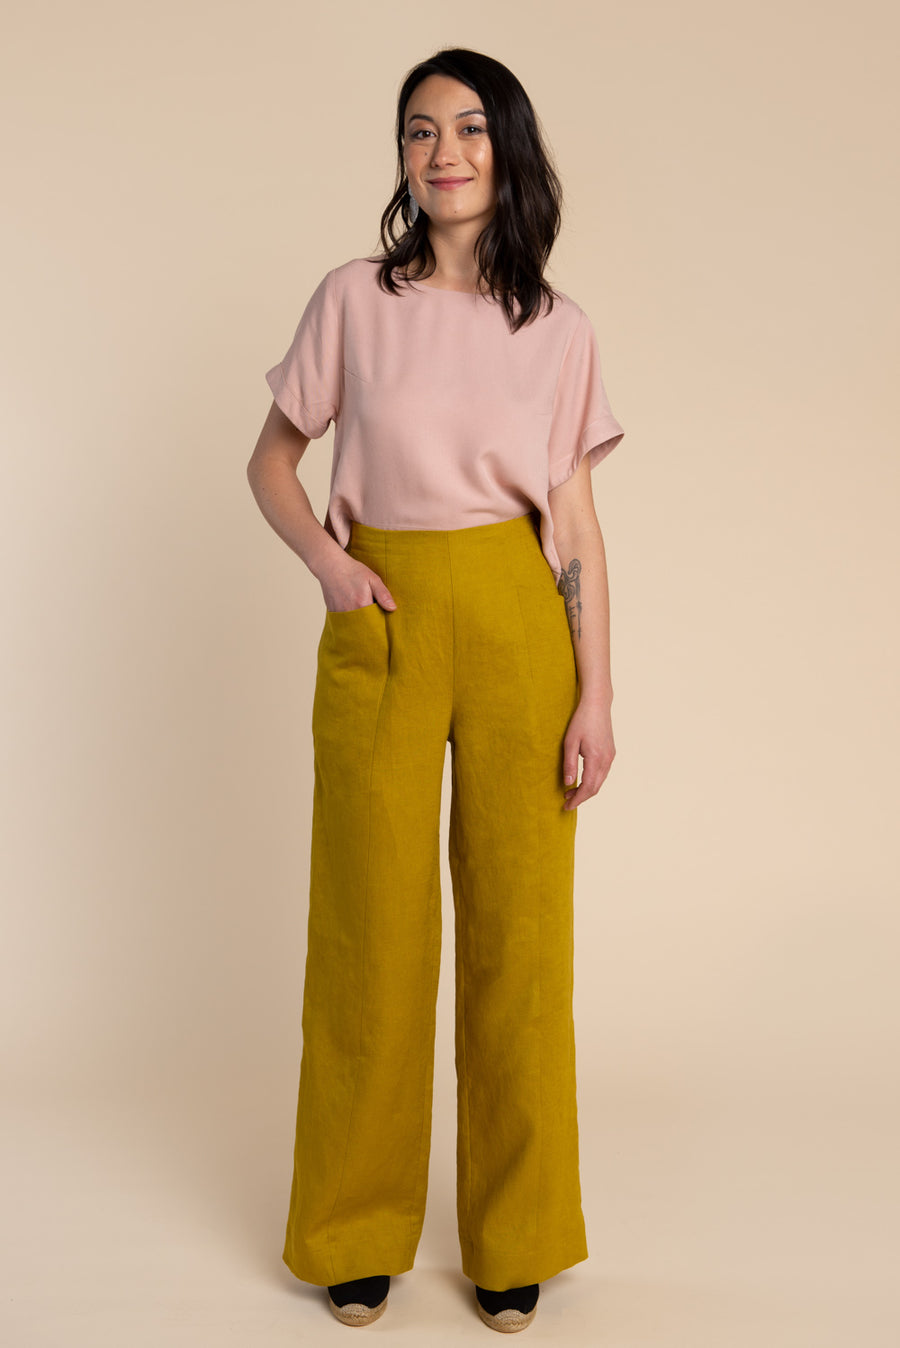 Looking for a high, elastic waist, wide leg pant pattern? : r/sewing